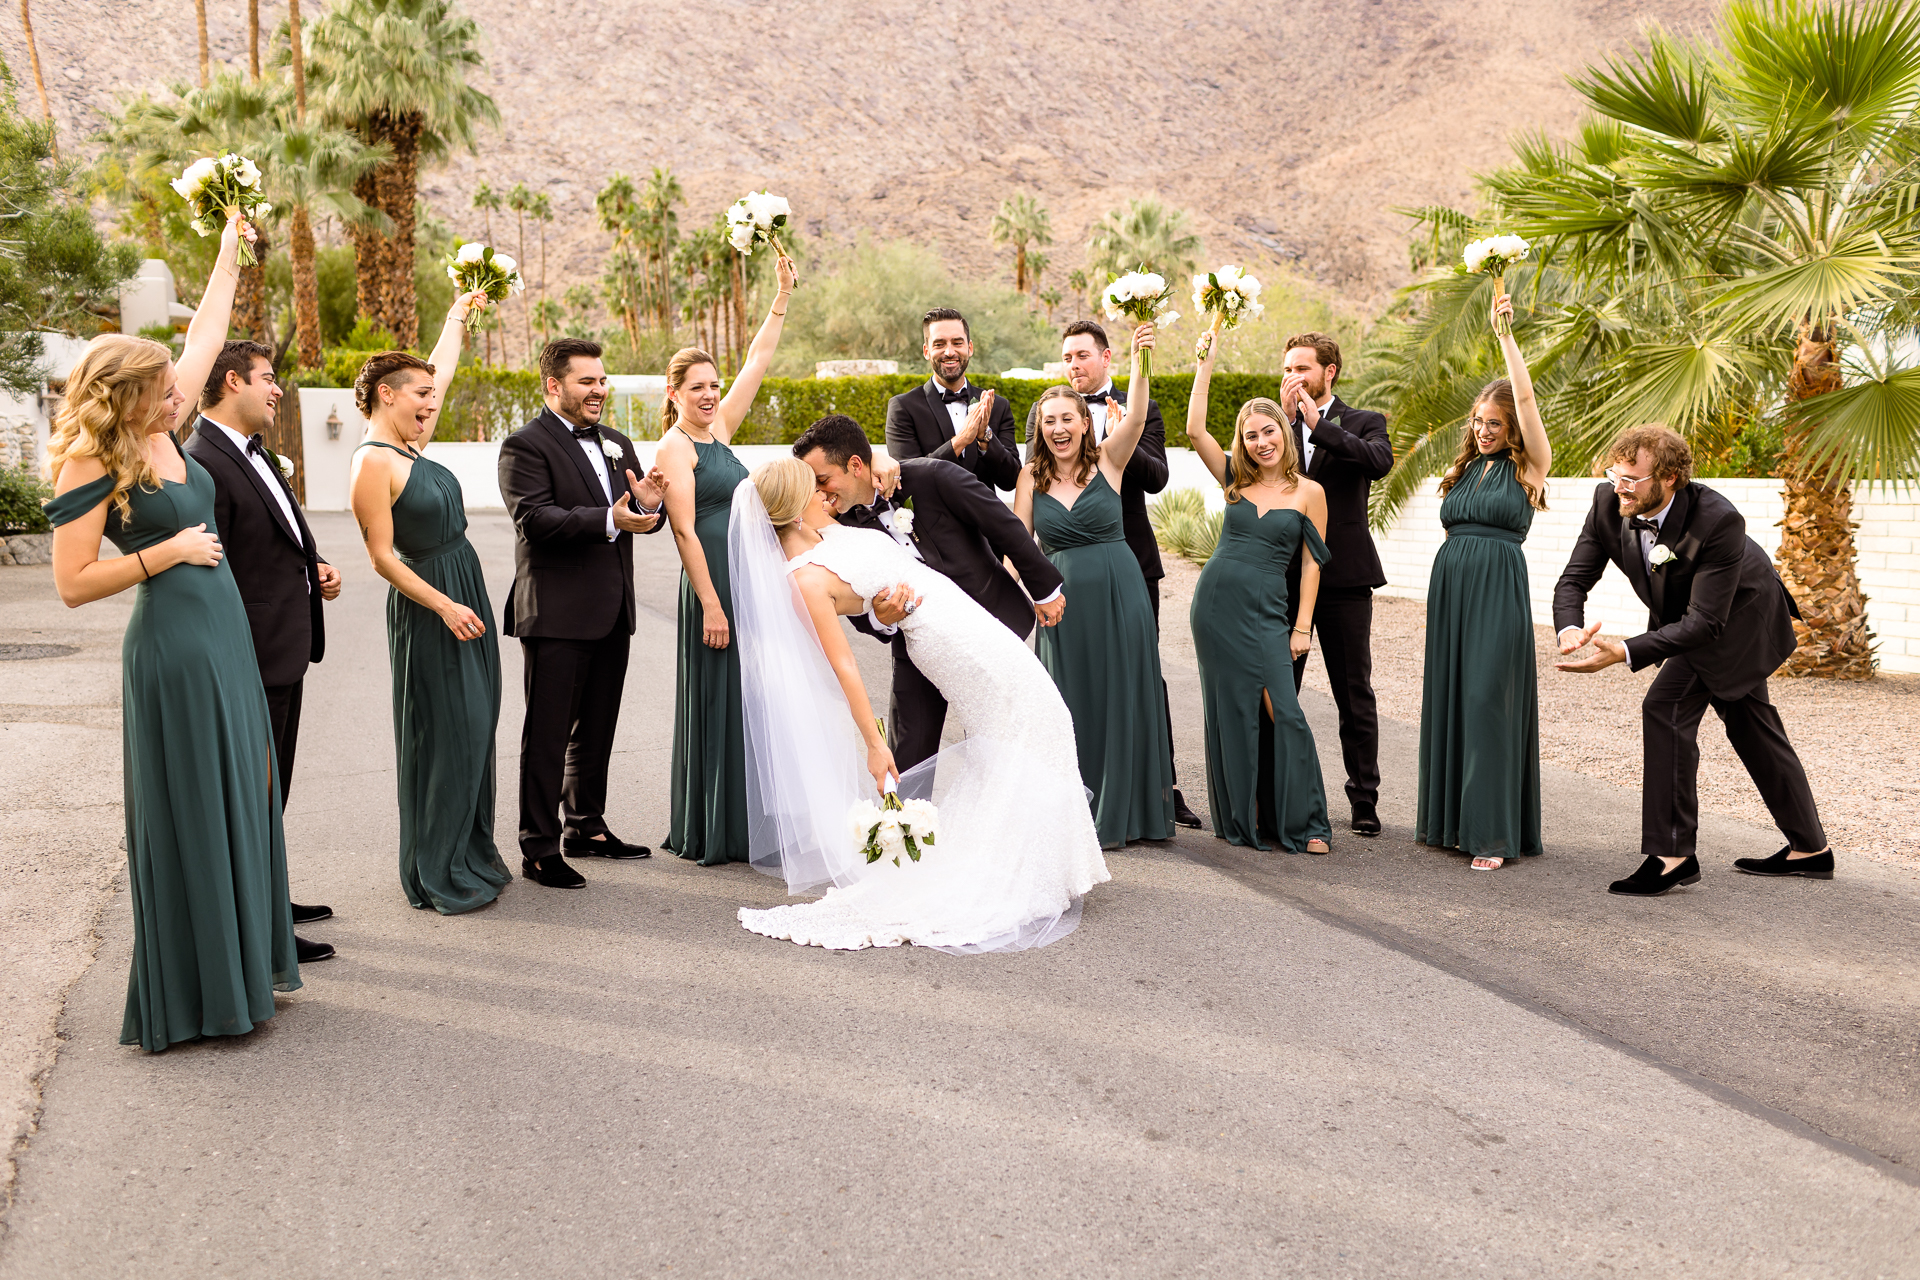 Bridal party portraits in Palm Springs, California - emerald bridesmaids dress inspiration